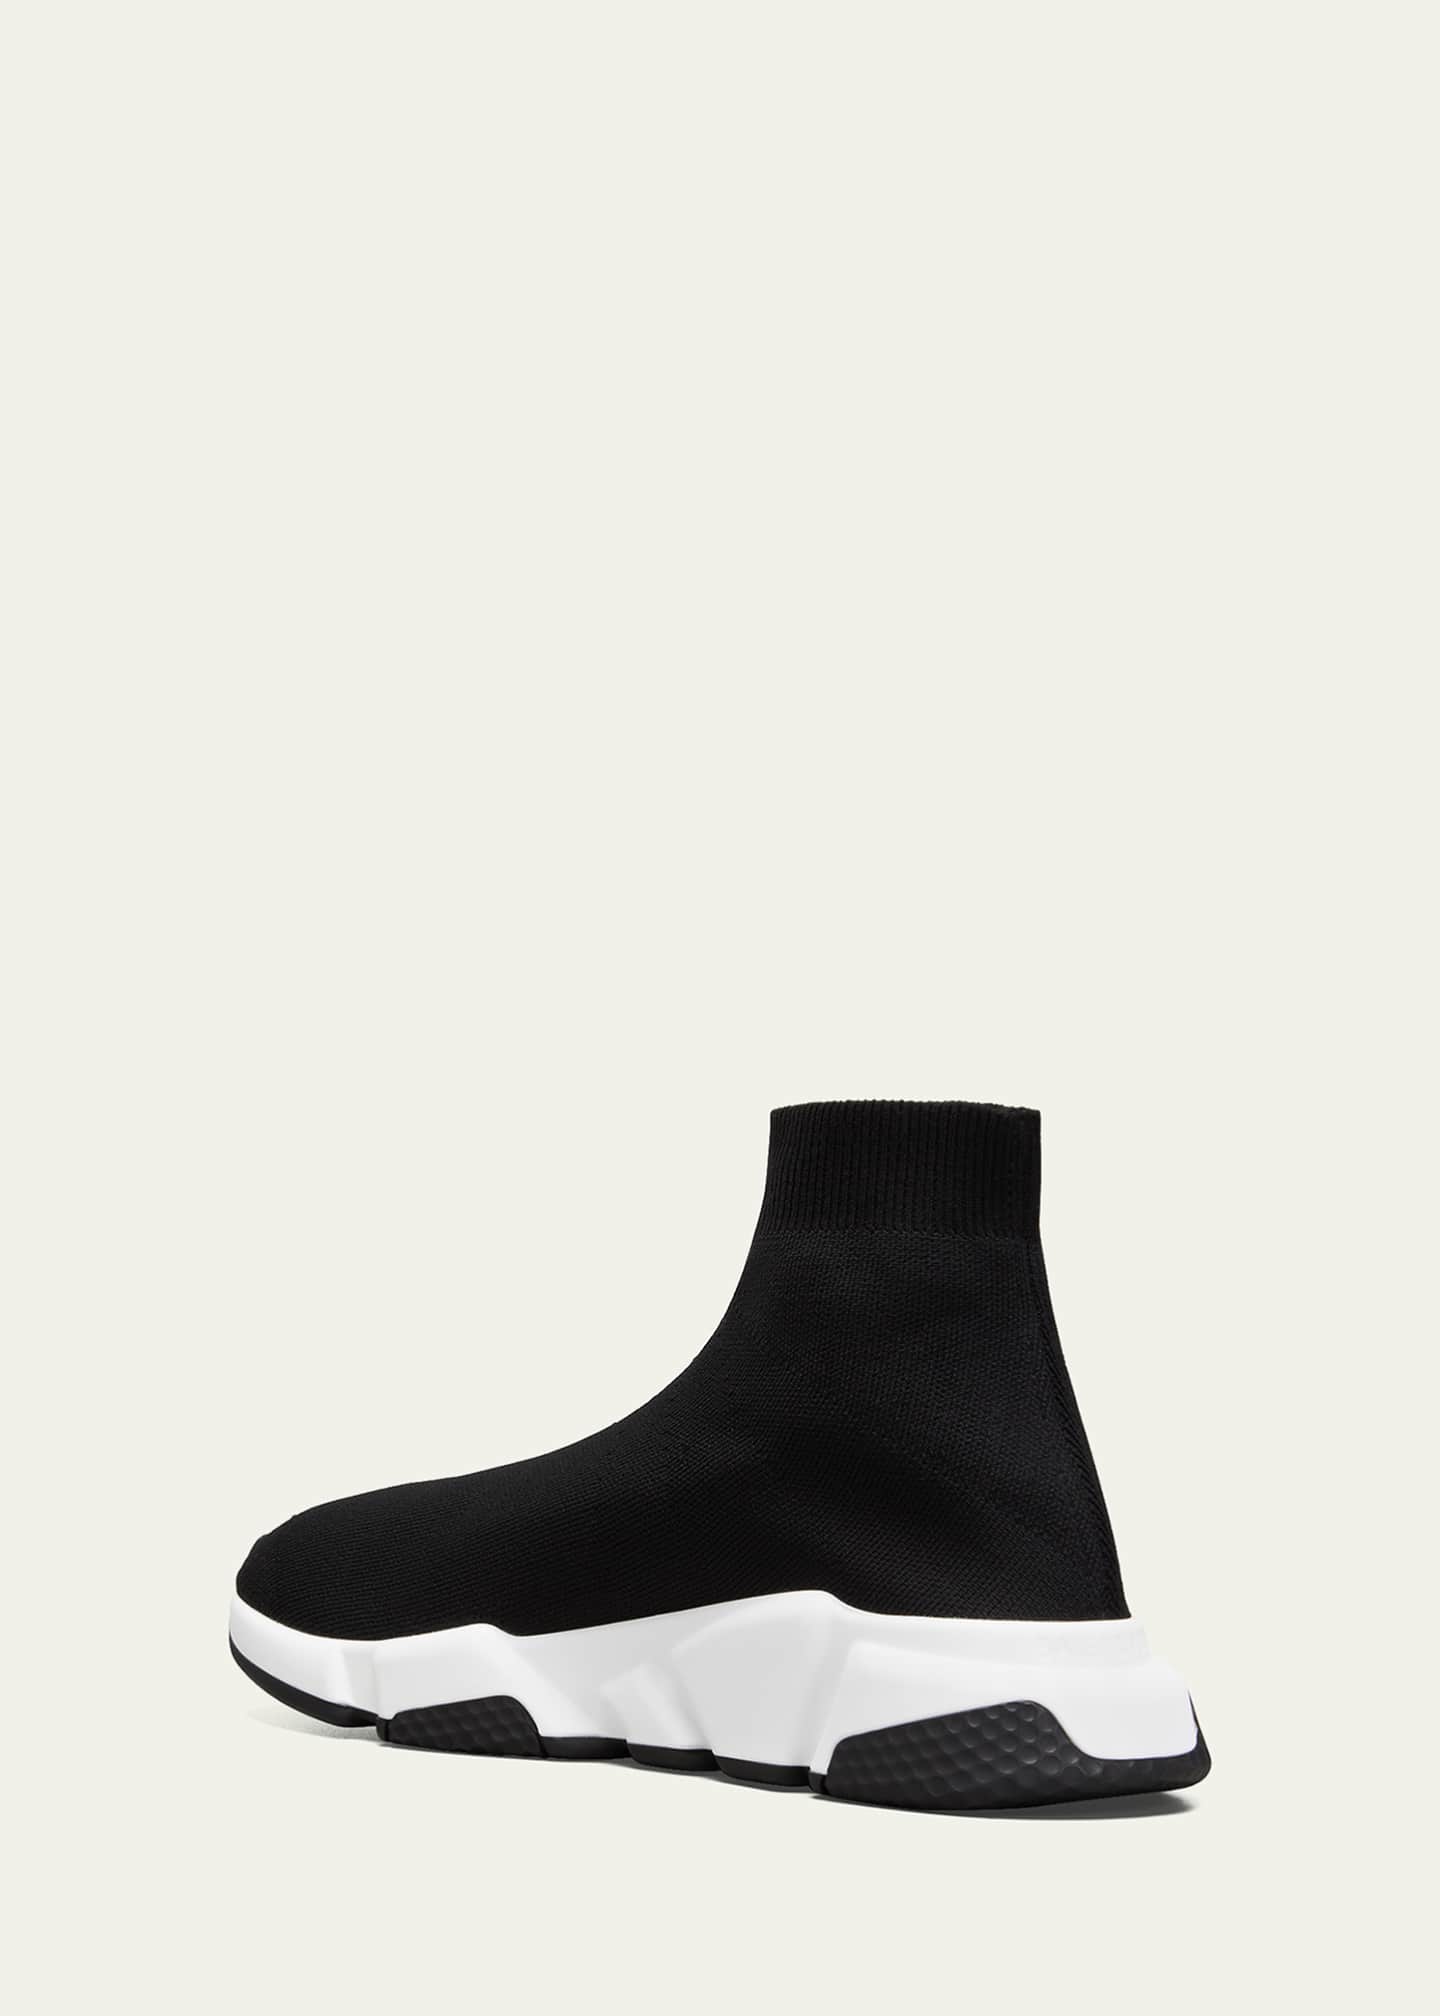 Balenciaga Speed Trainer 2.0 Sock Sneakers w/ Tags - Brown